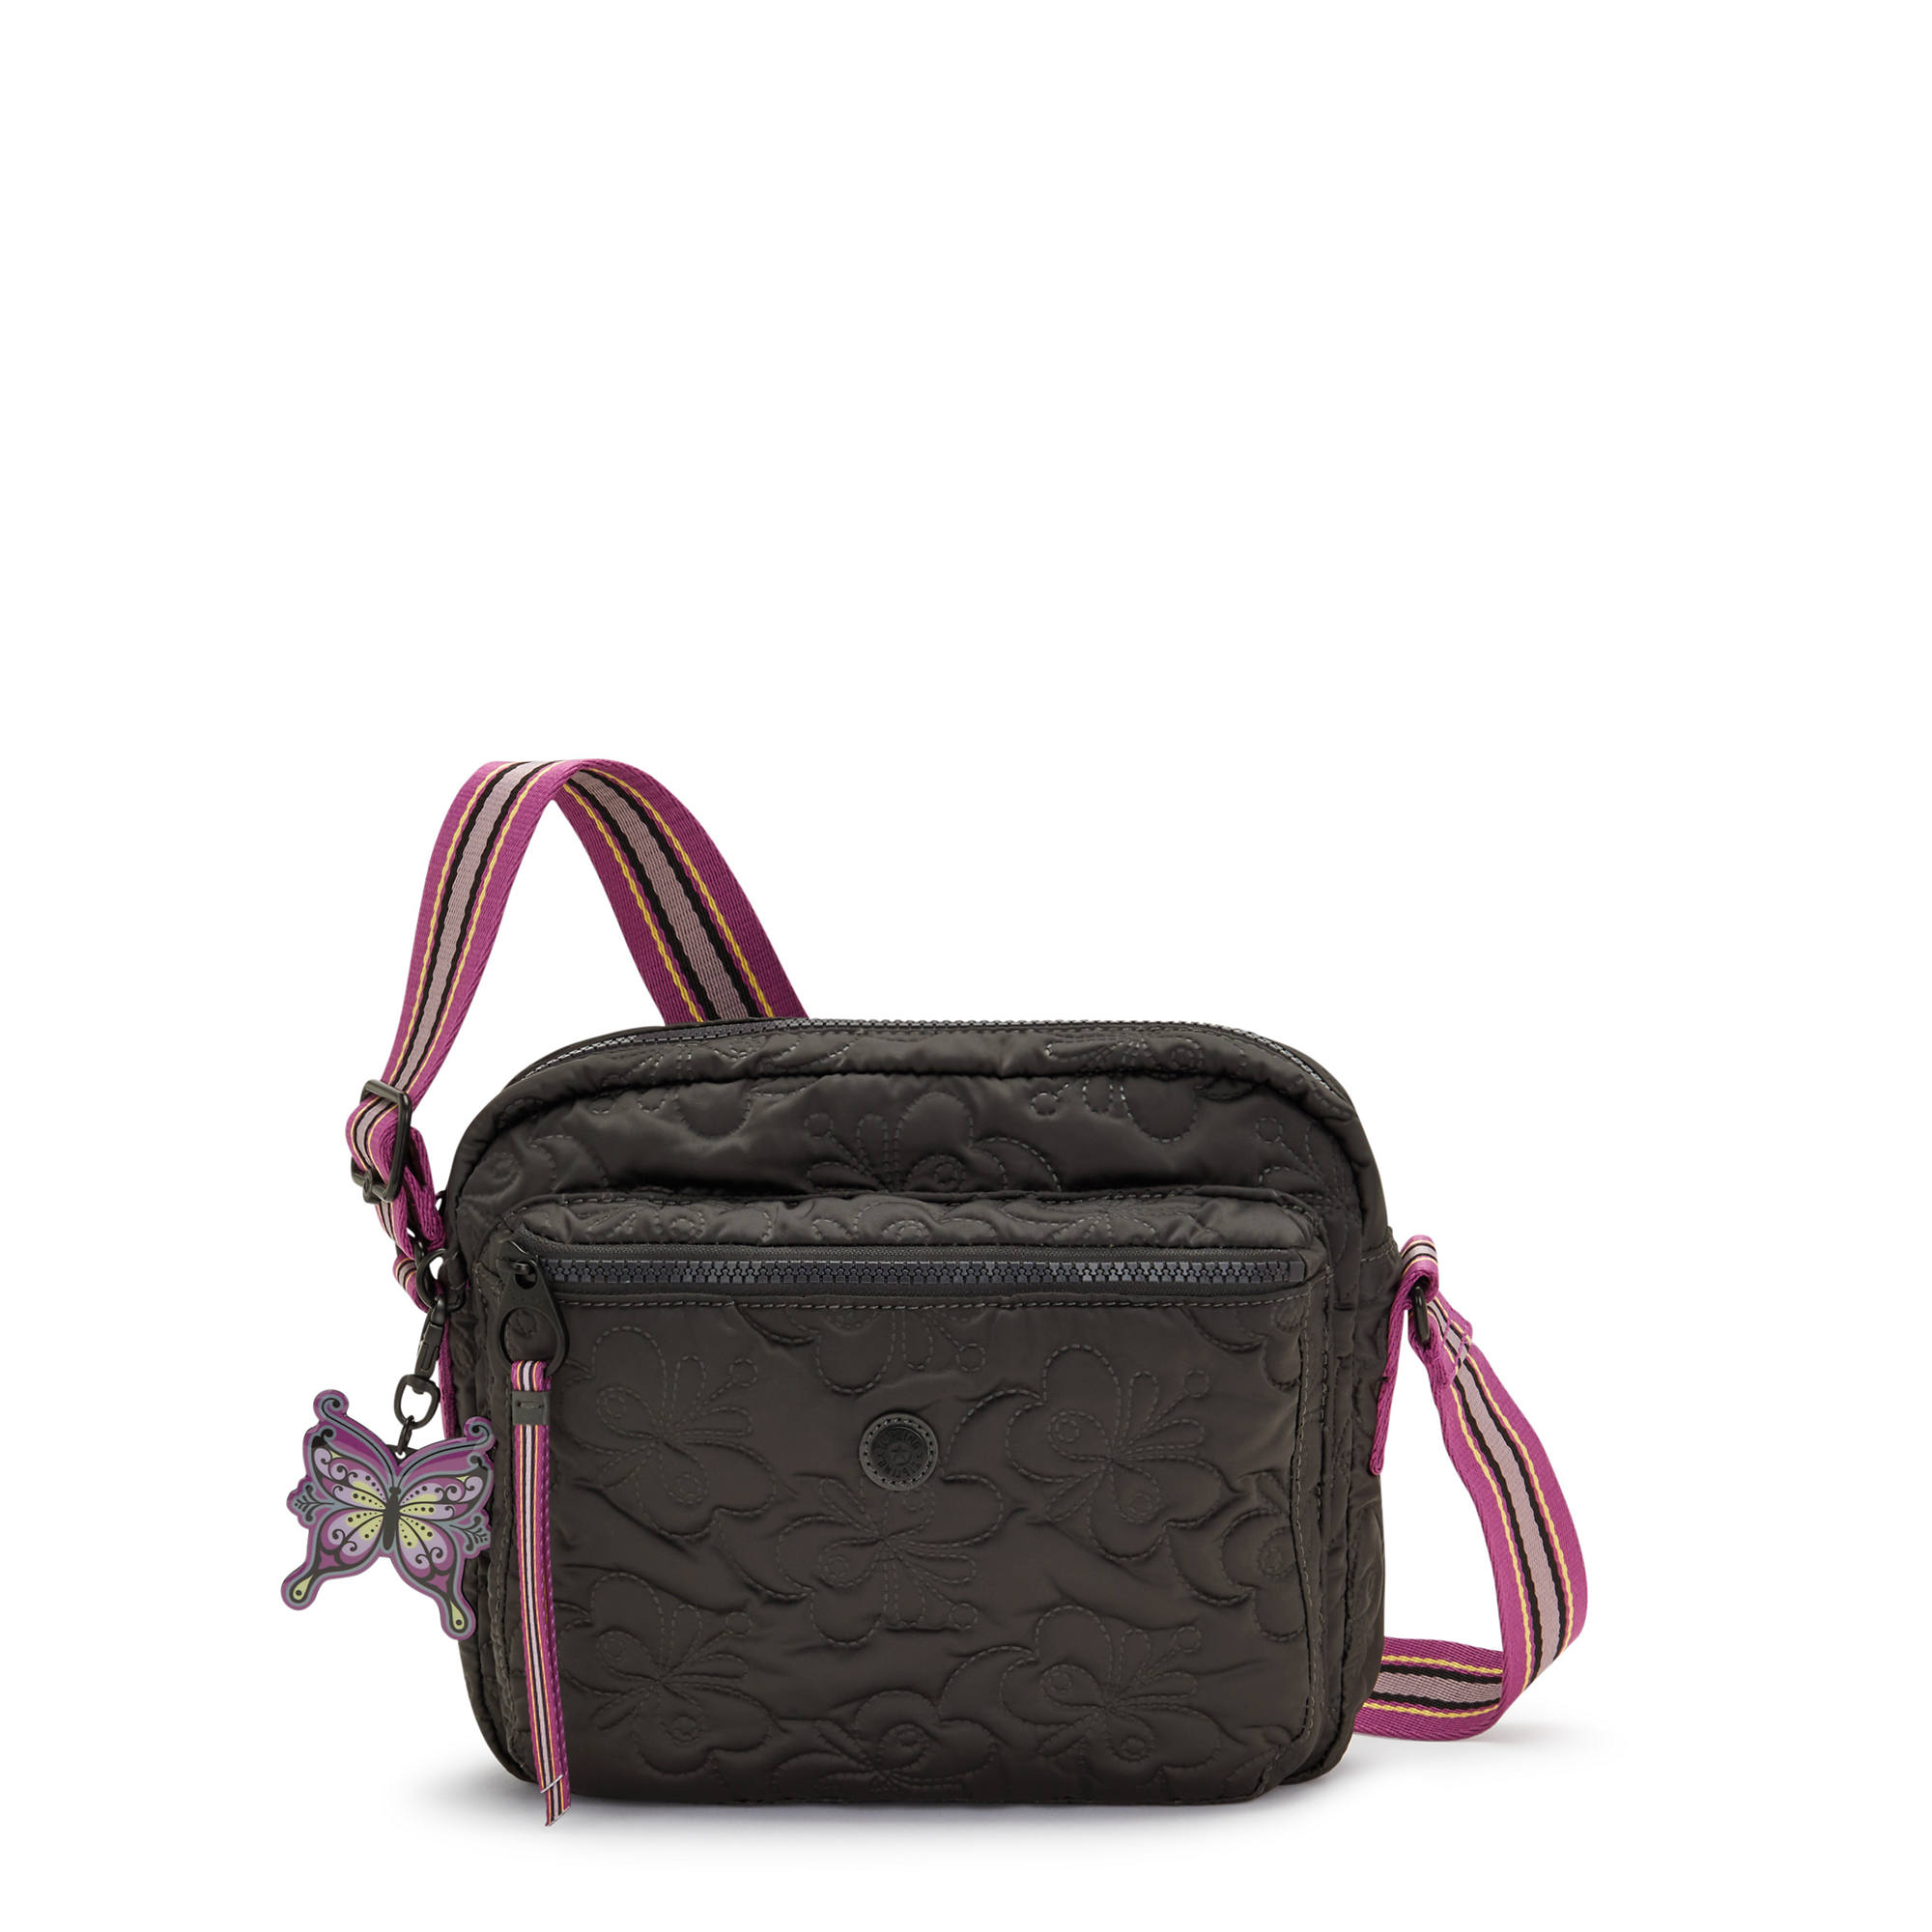 Exclusively Designed Anna Sui Travel Bags For Guardian Shoppers! - Let's  Roll With Carol